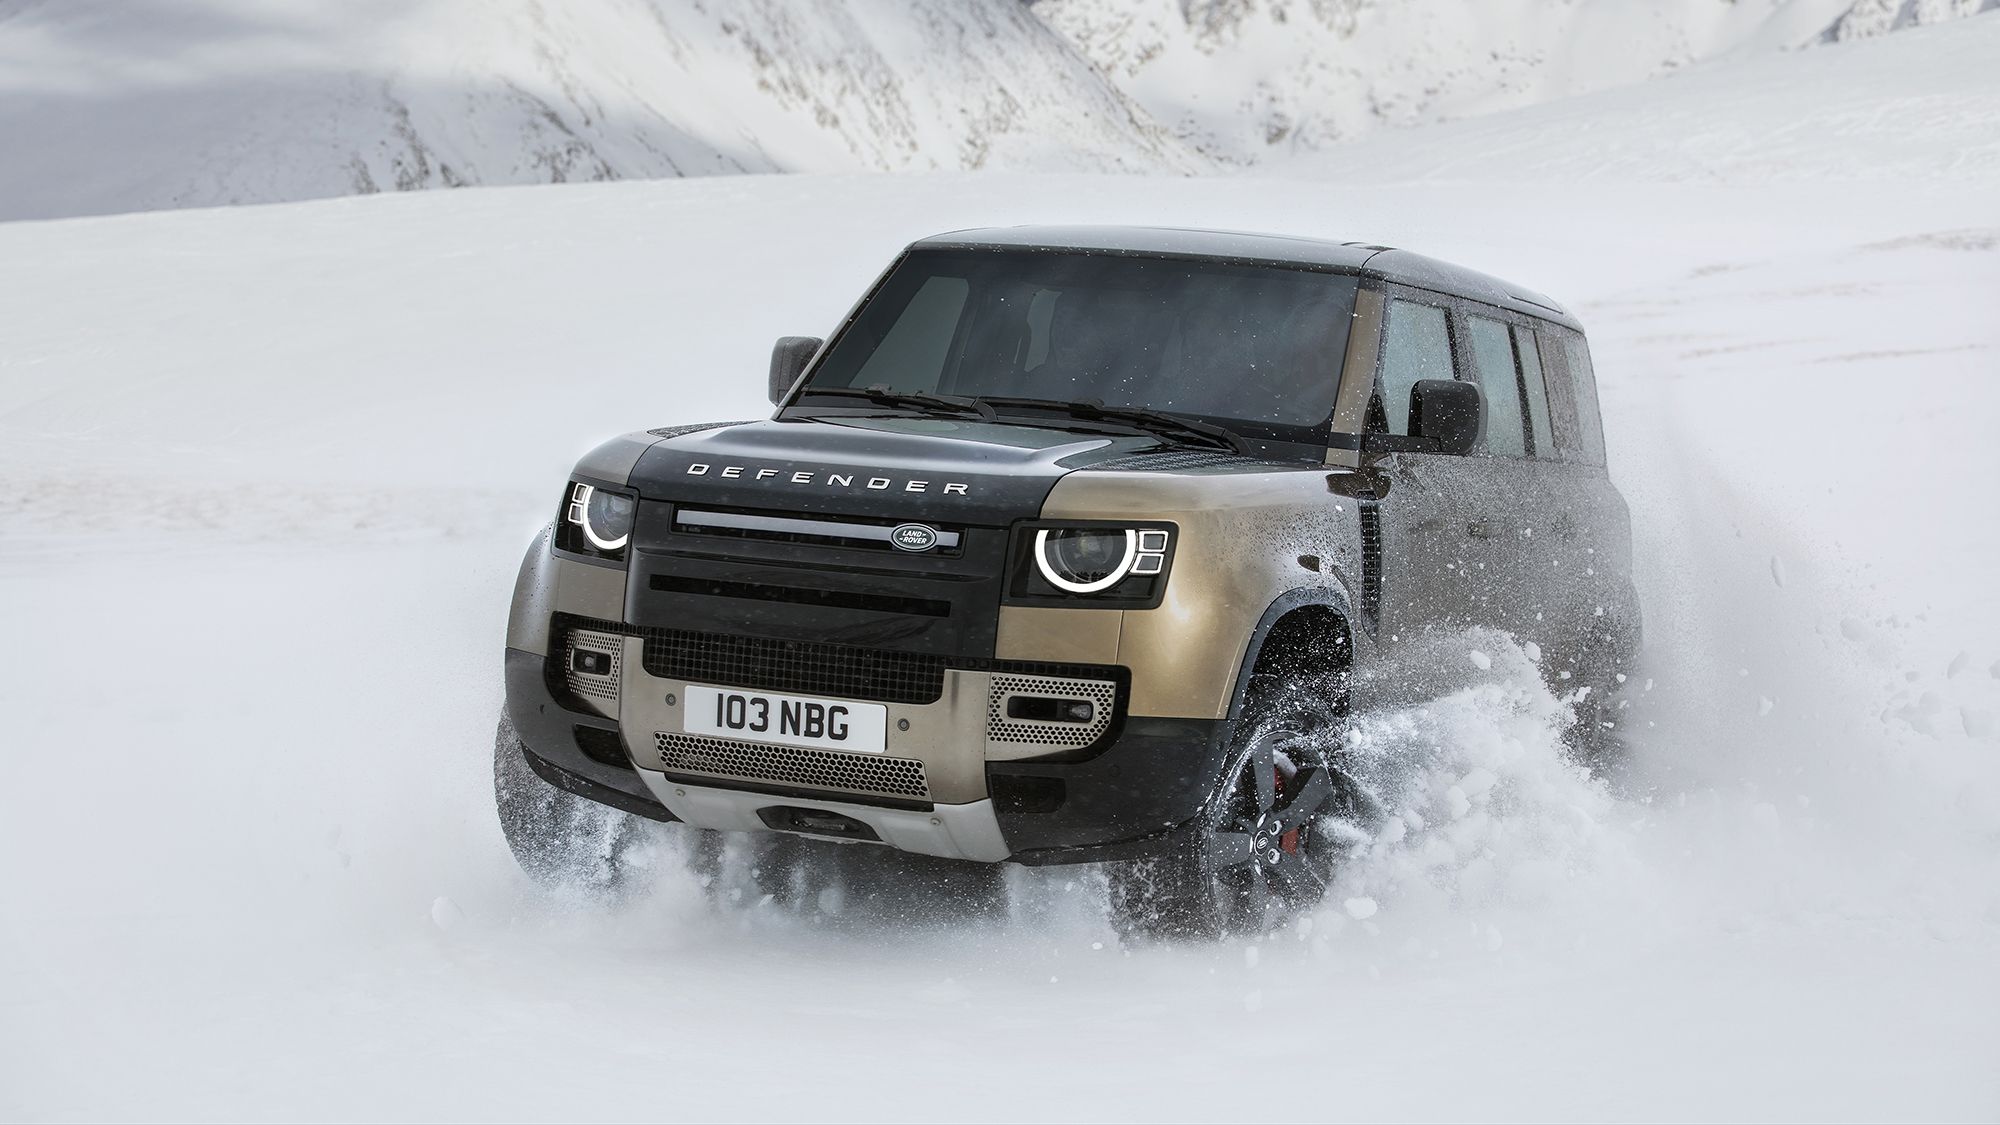 New Land Rover Defender image gallery: official image of the 2020